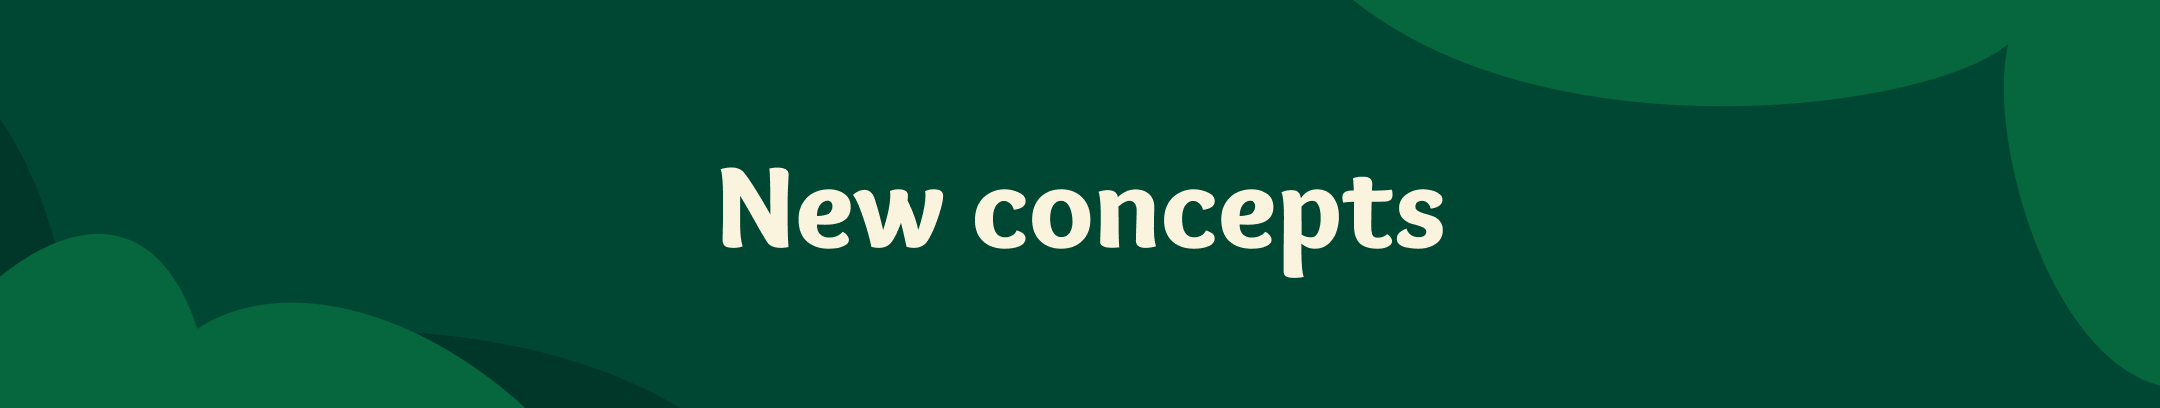 This is a wide banner-like image with a dark green background and the words “New concepts” in large, white text centered across the slide.